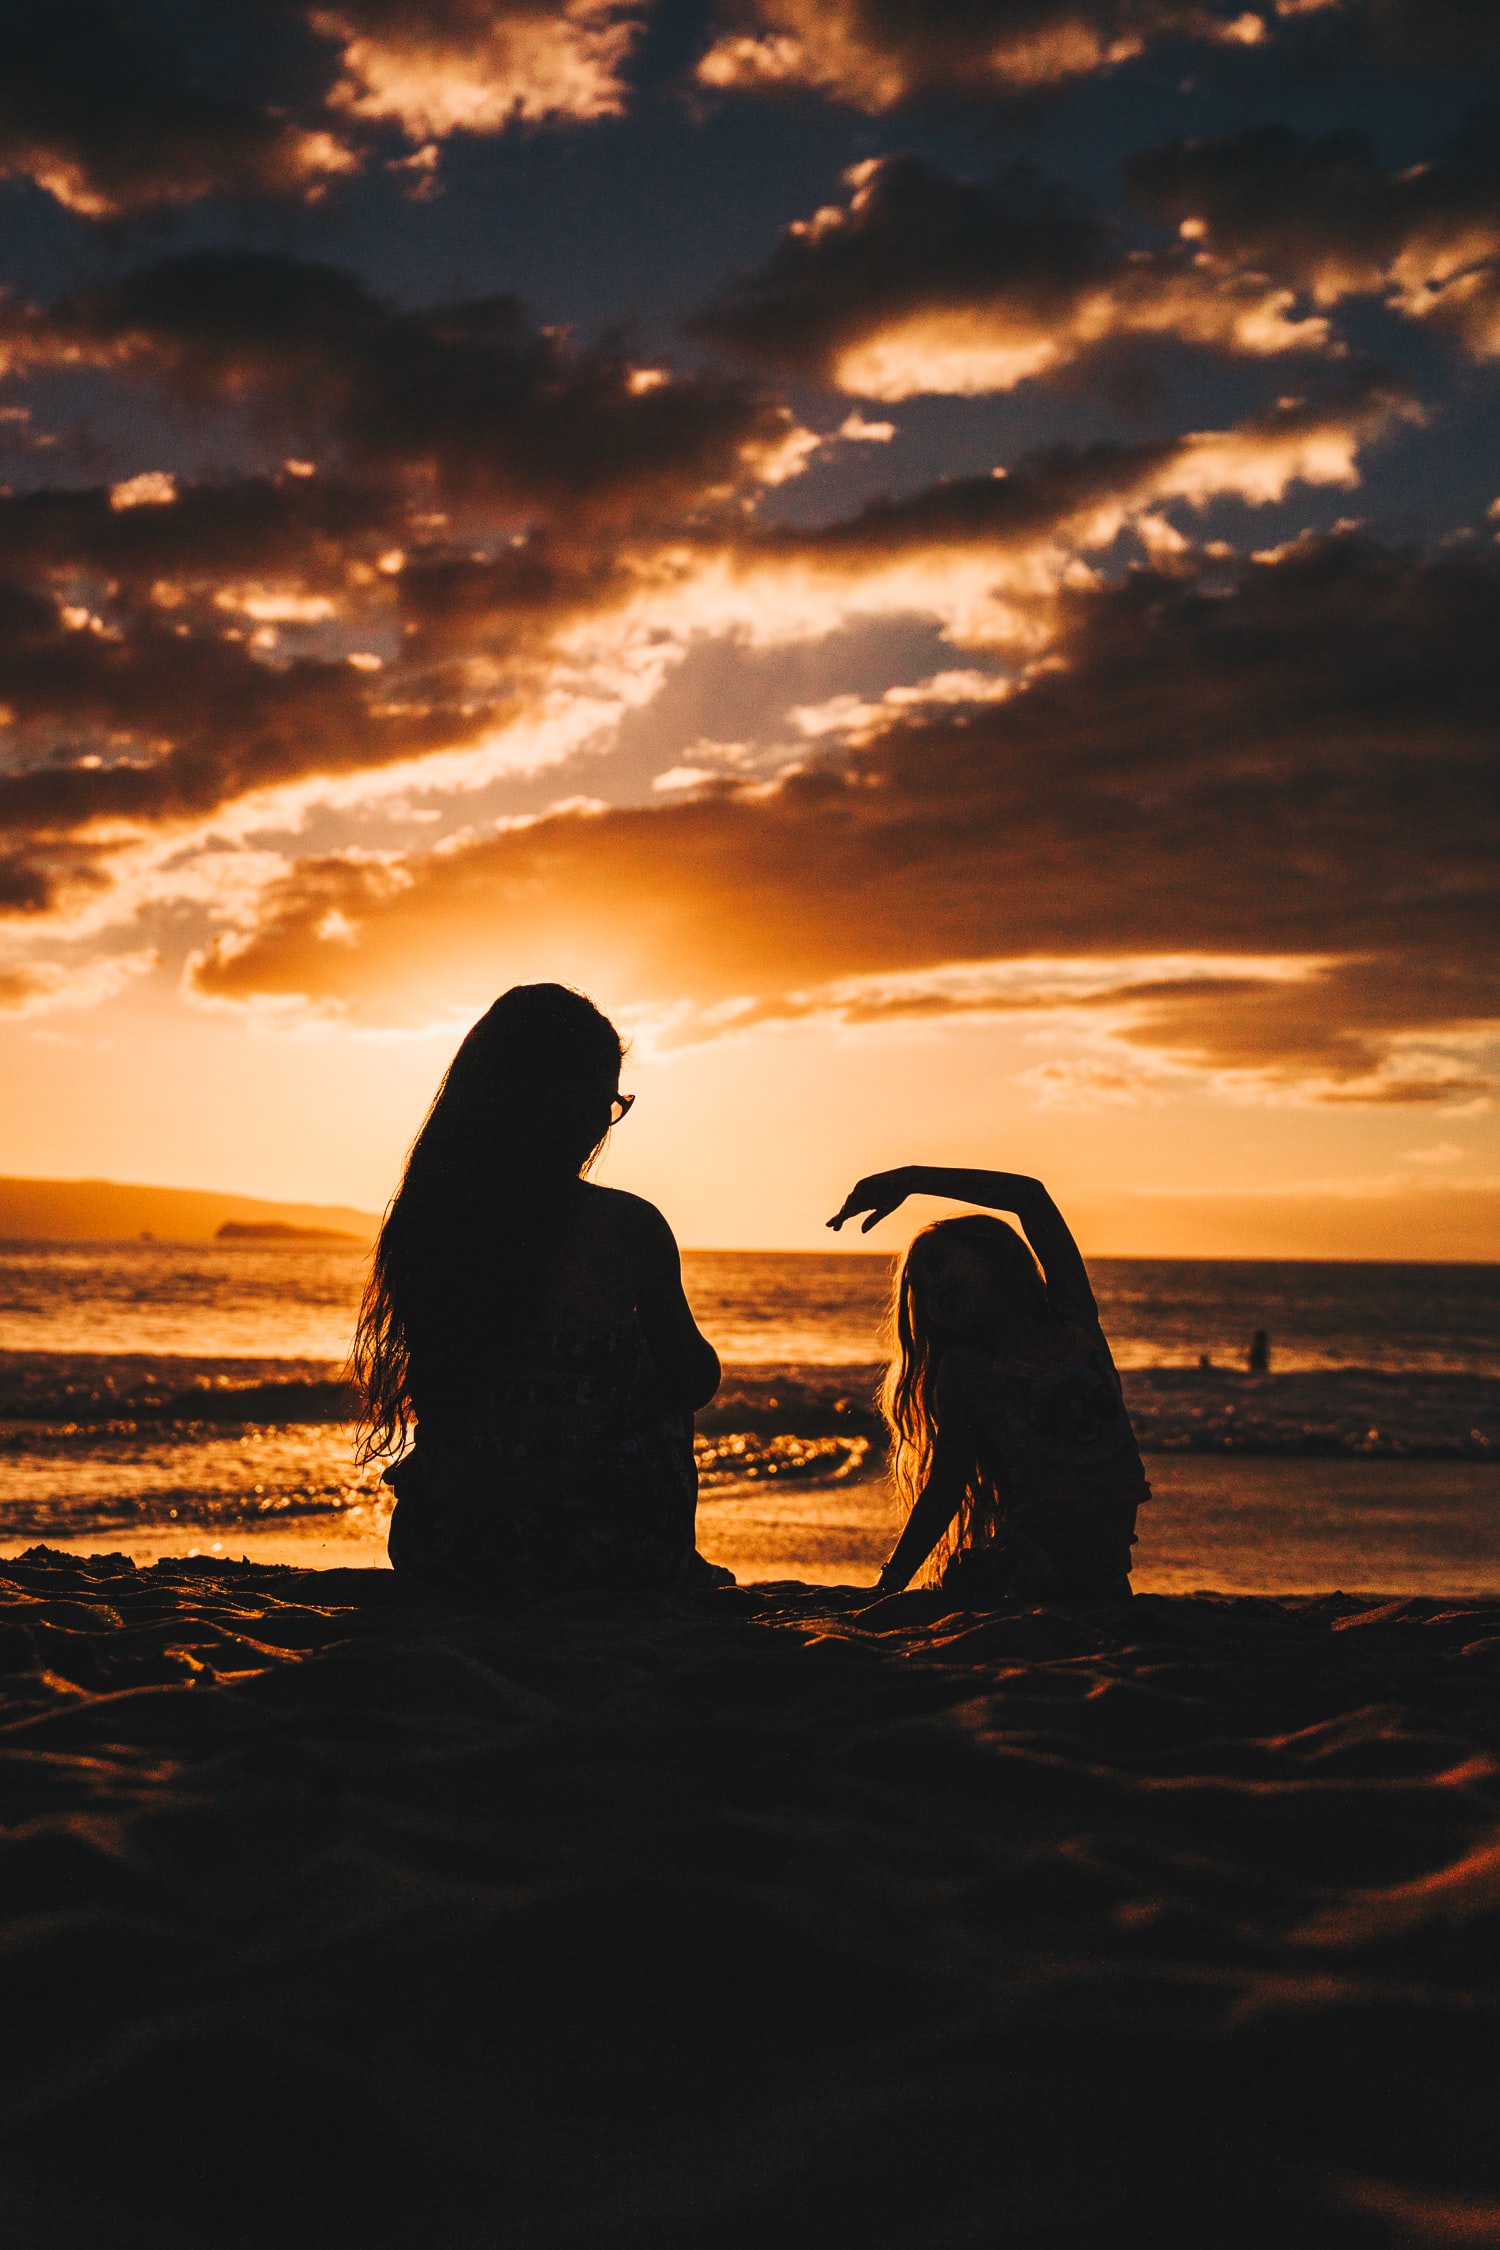 Mother and daughter on beach at sunset